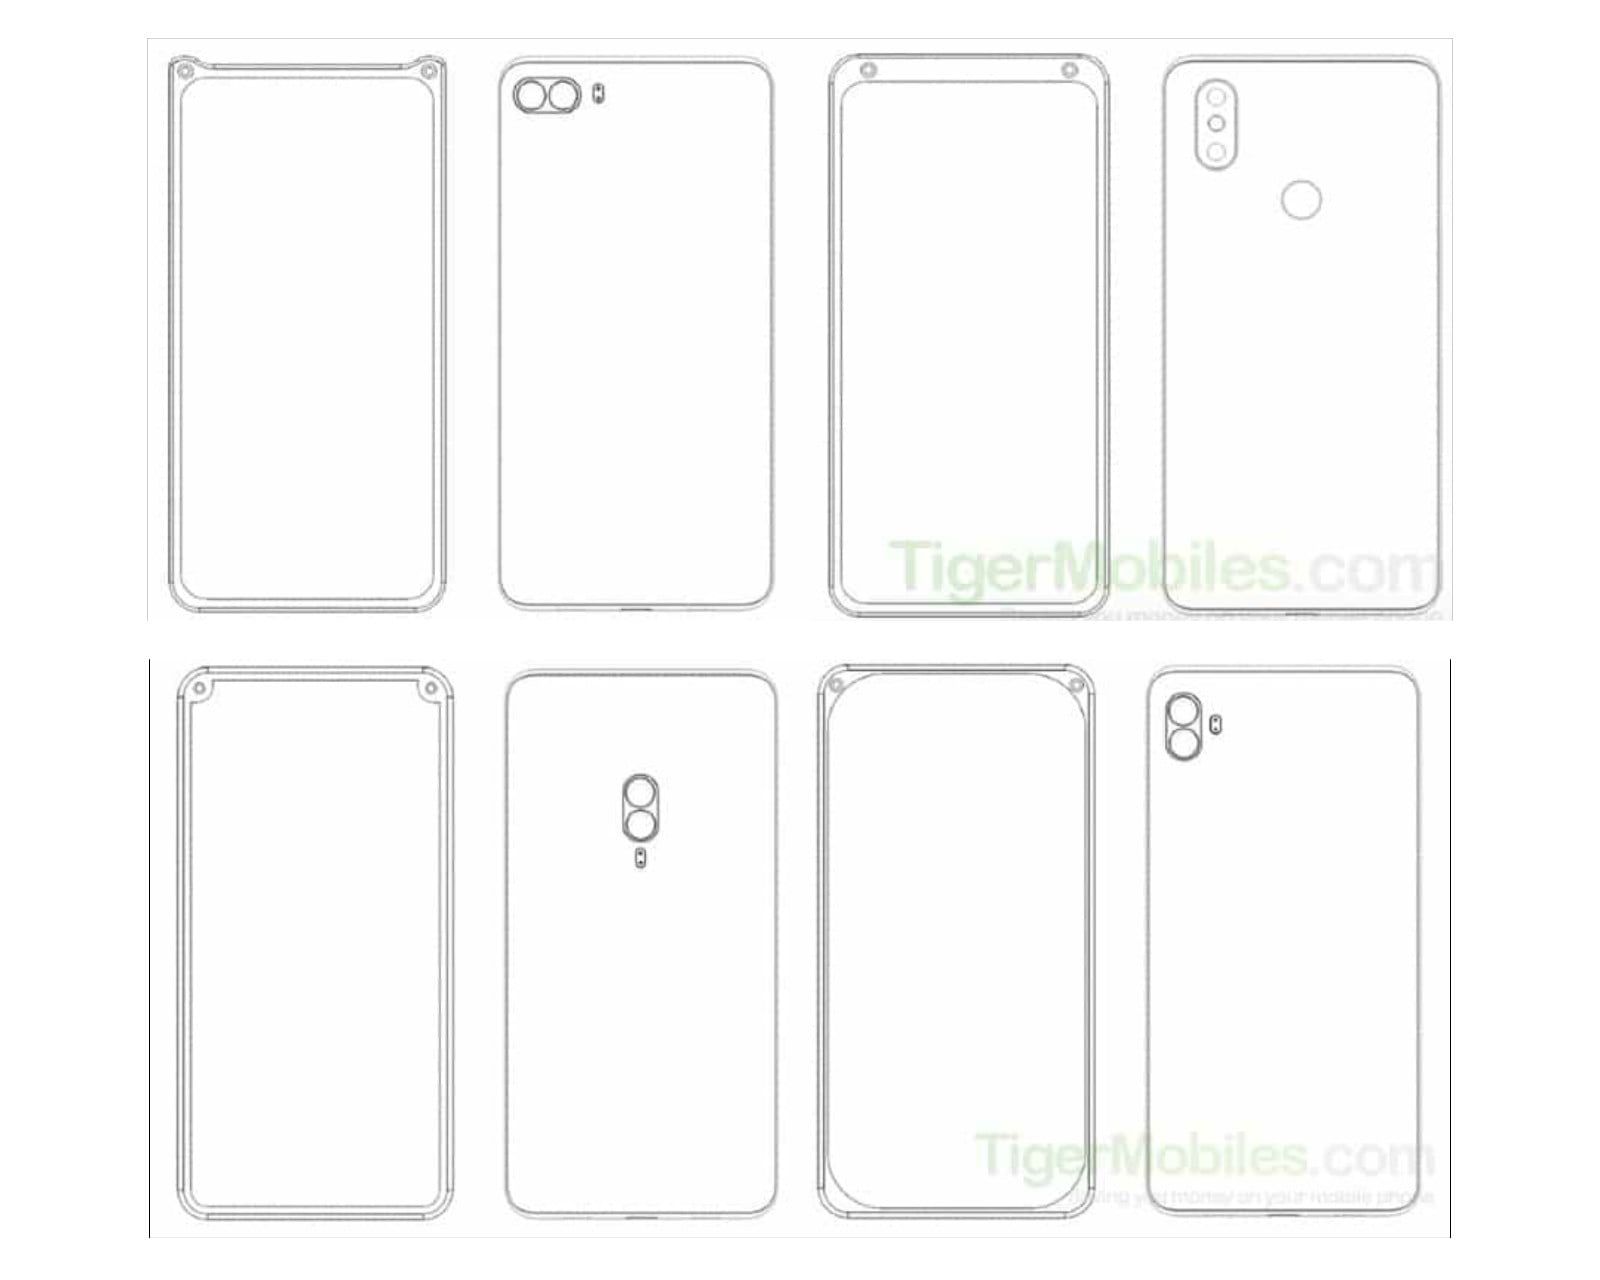 New Xiaomi Patent Suggests Different Placement For Front Camera